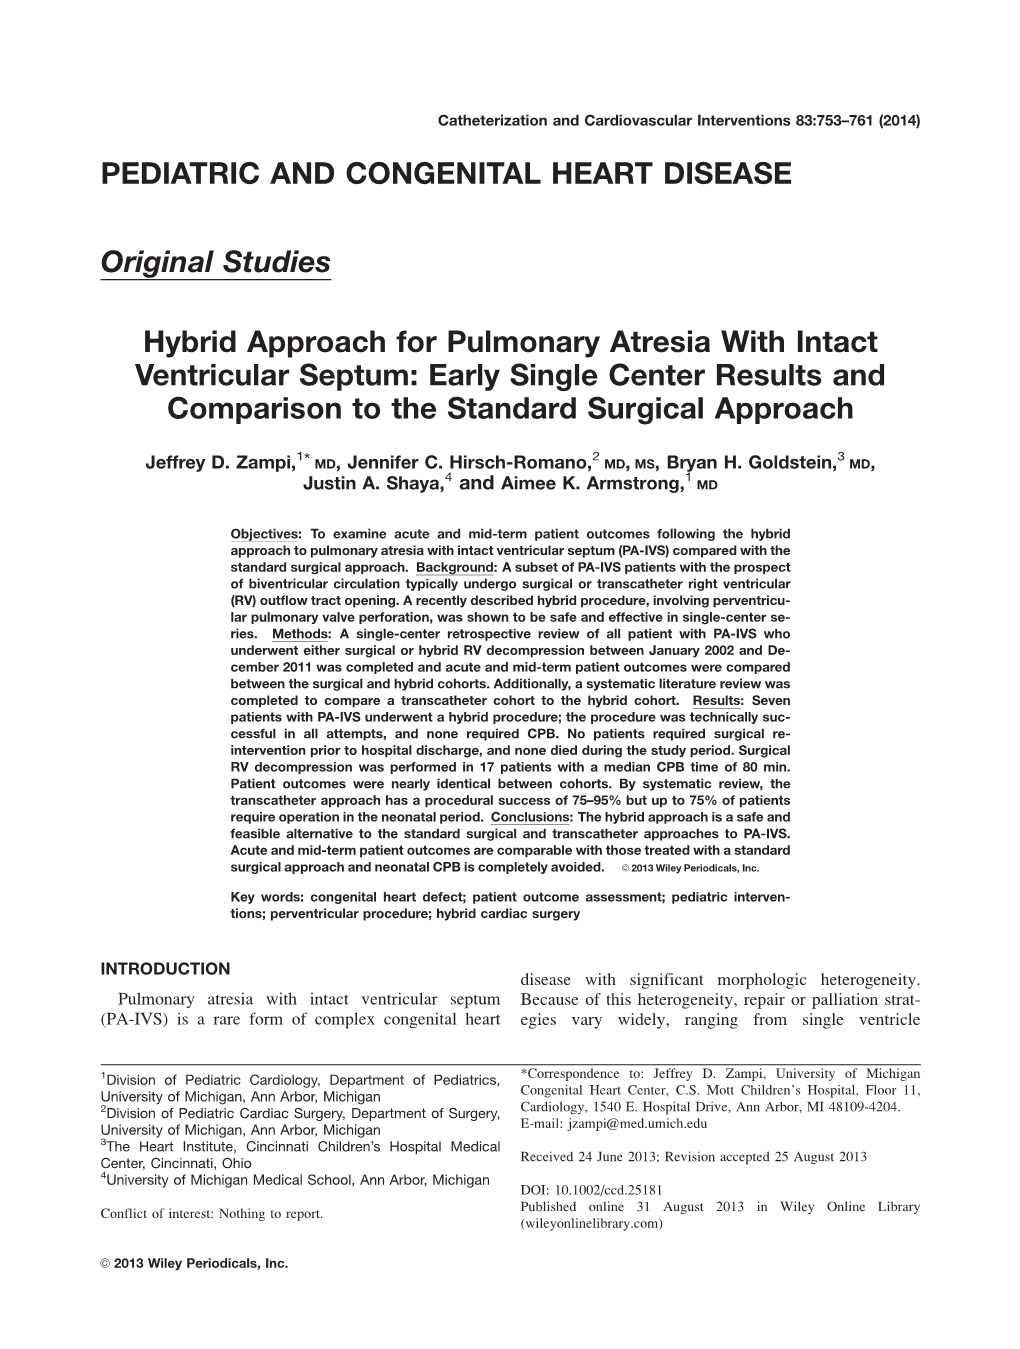 Hybrid Approach for Pulmonary Atresia with Intact Ventricular Septum: Early Single Center Results and Comparison to the Standard Surgical Approach